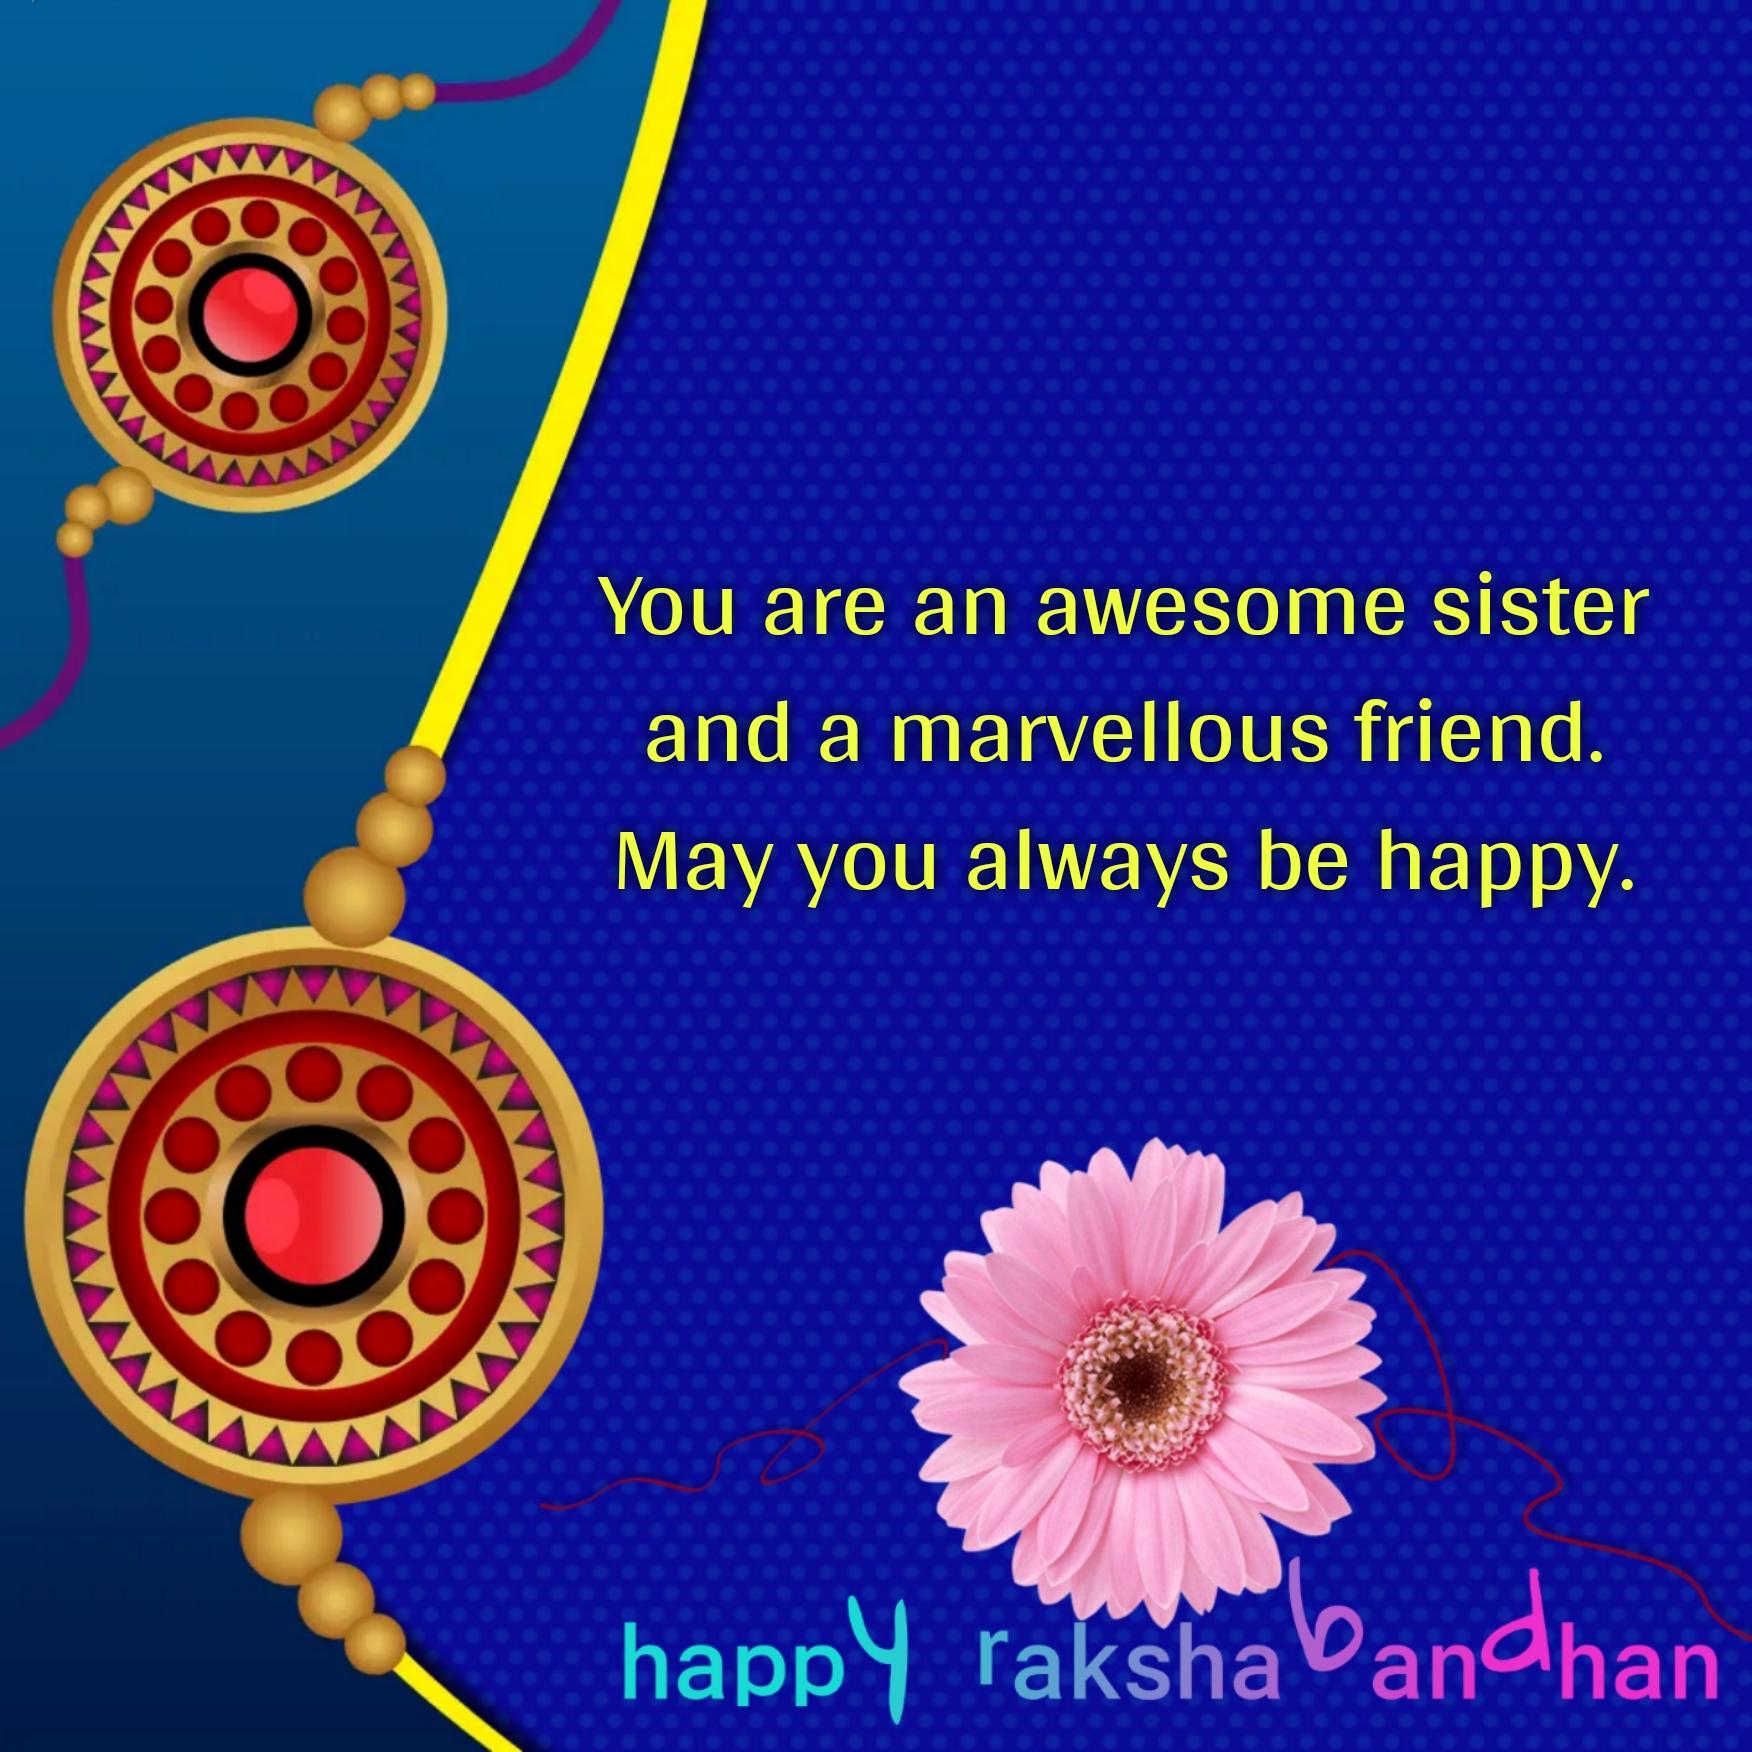 You are an awesome sister and a marvellous friend